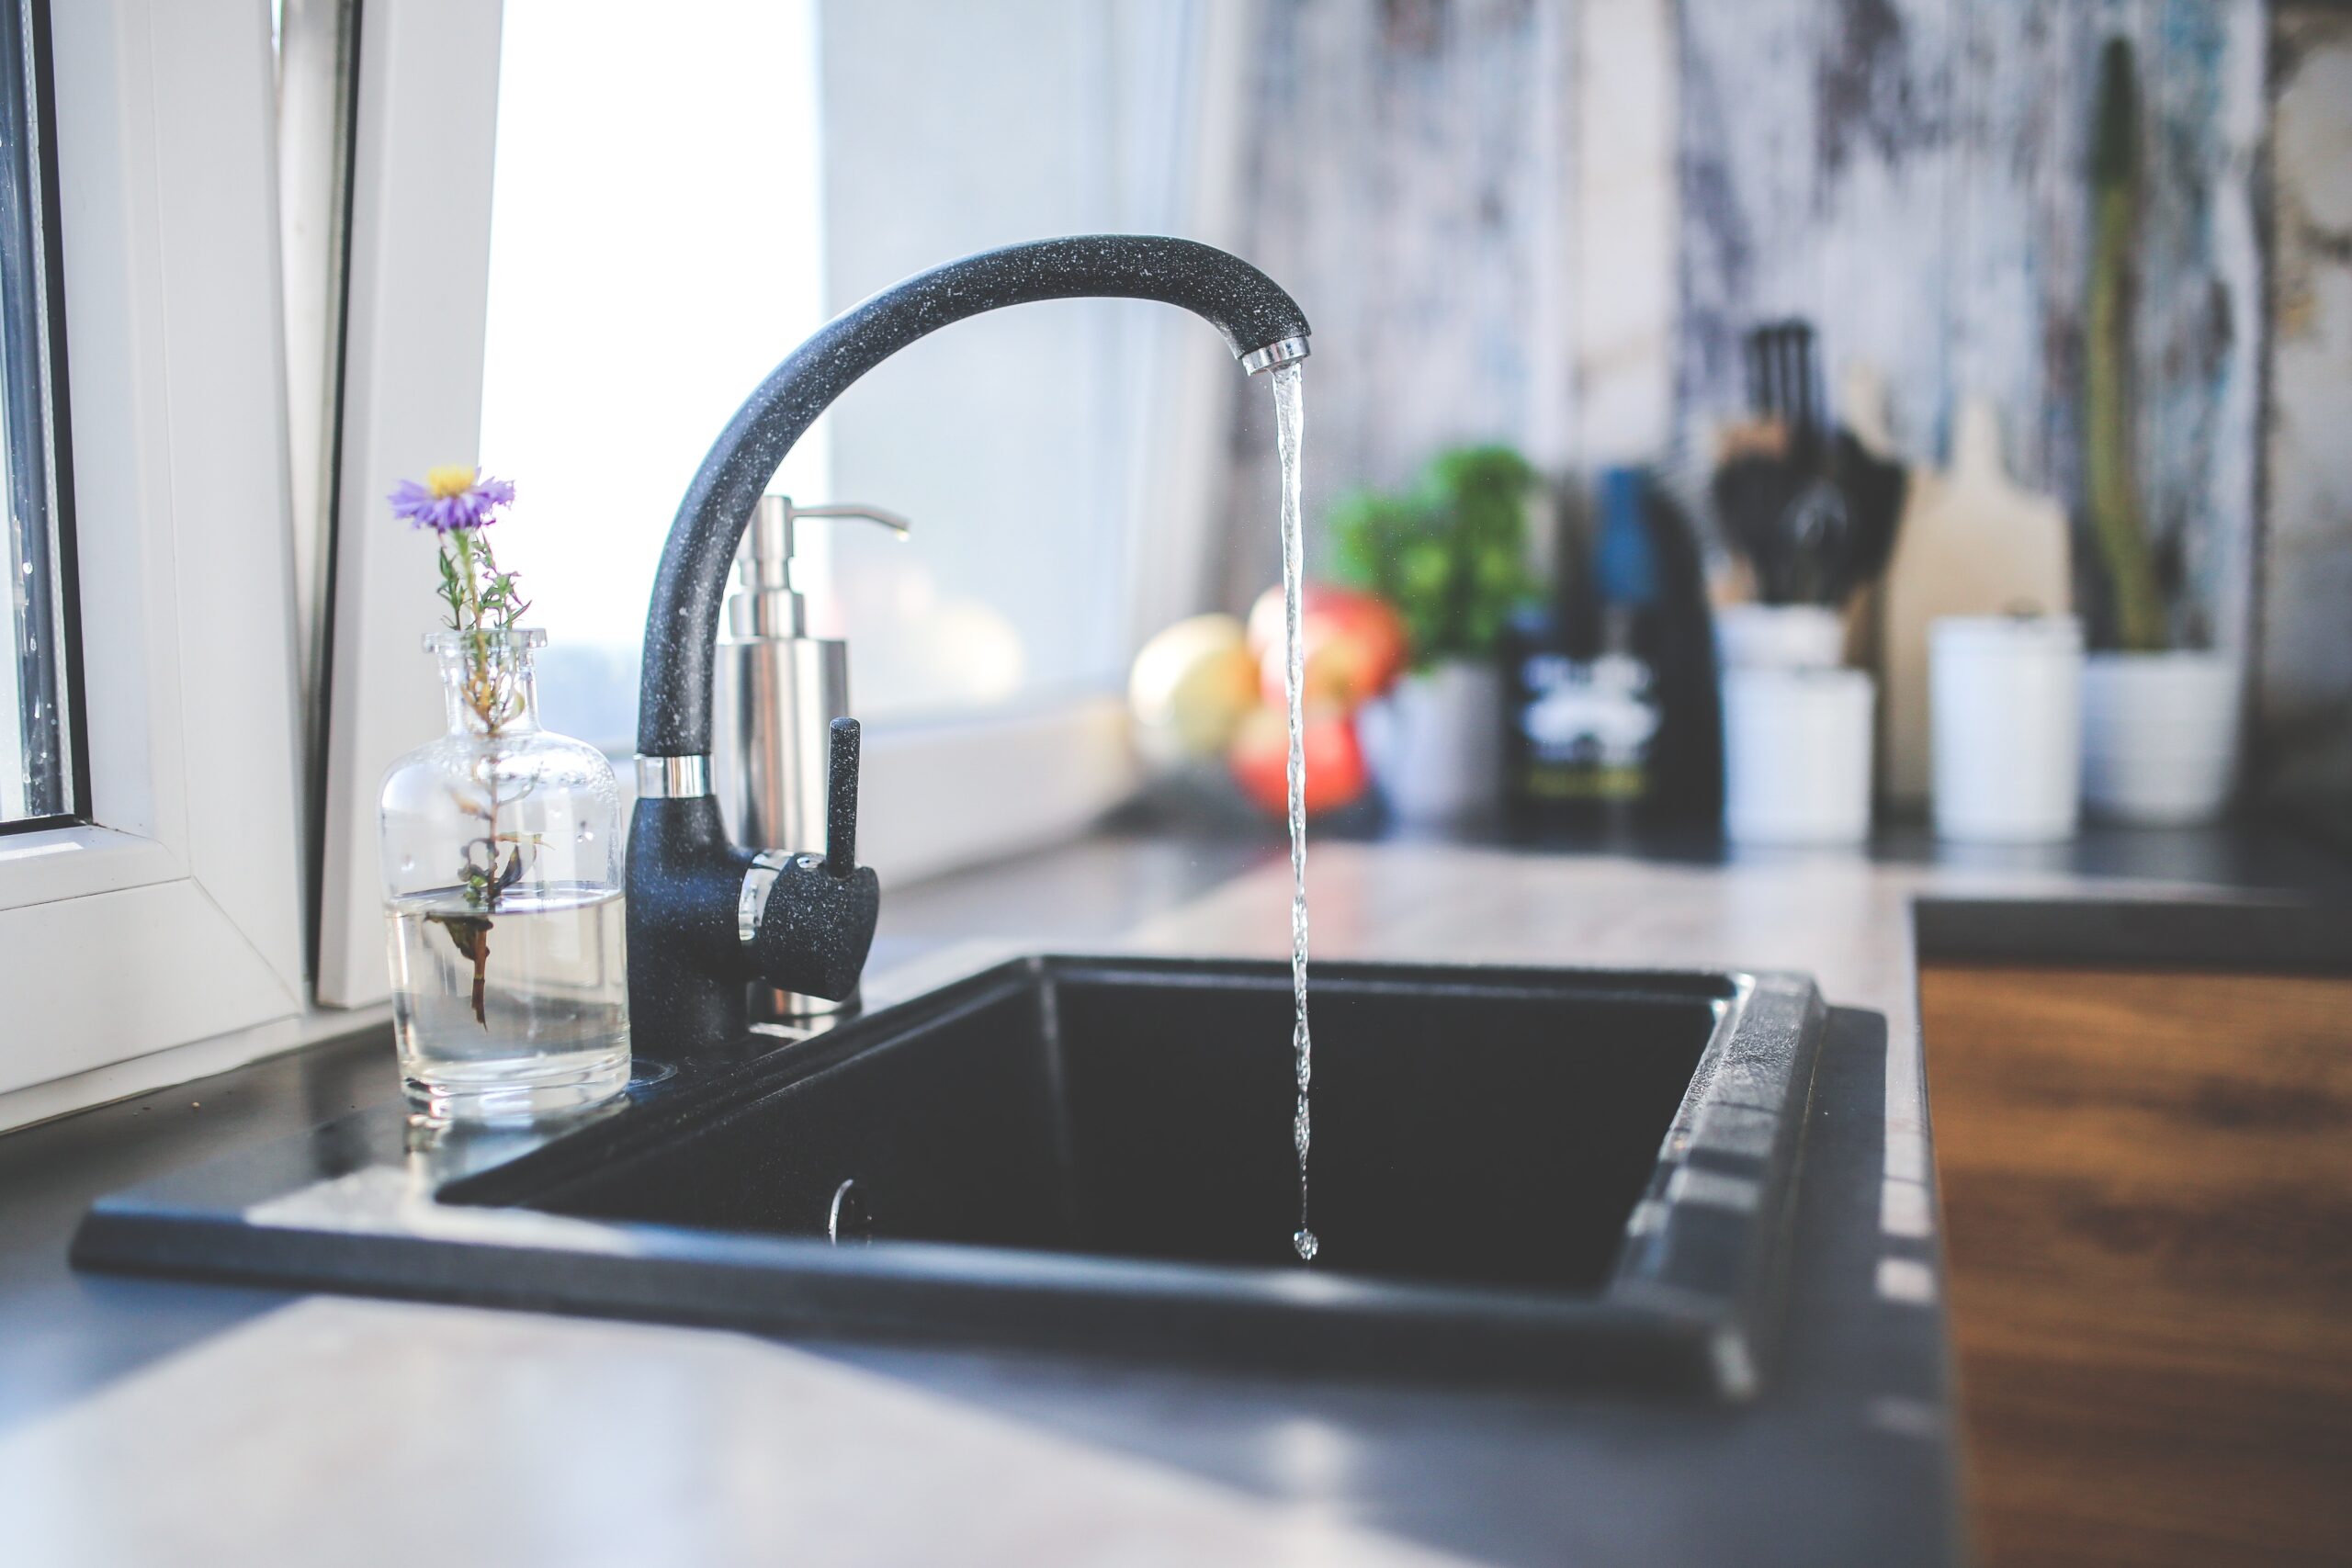 Water running from a faucet into a black kitchen sink